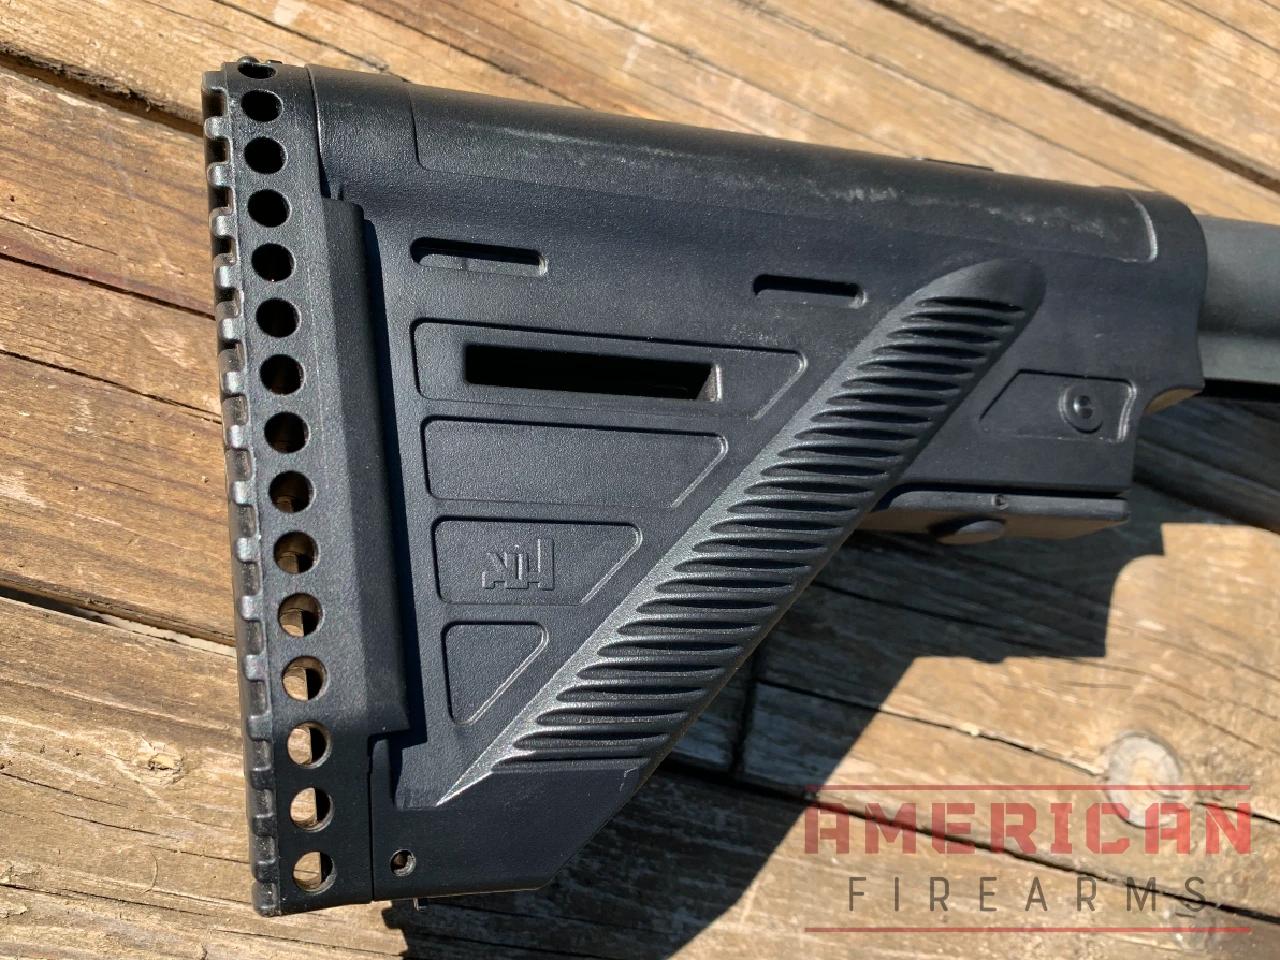 The boot-shaped buttstock is adjustable and totally polymer.